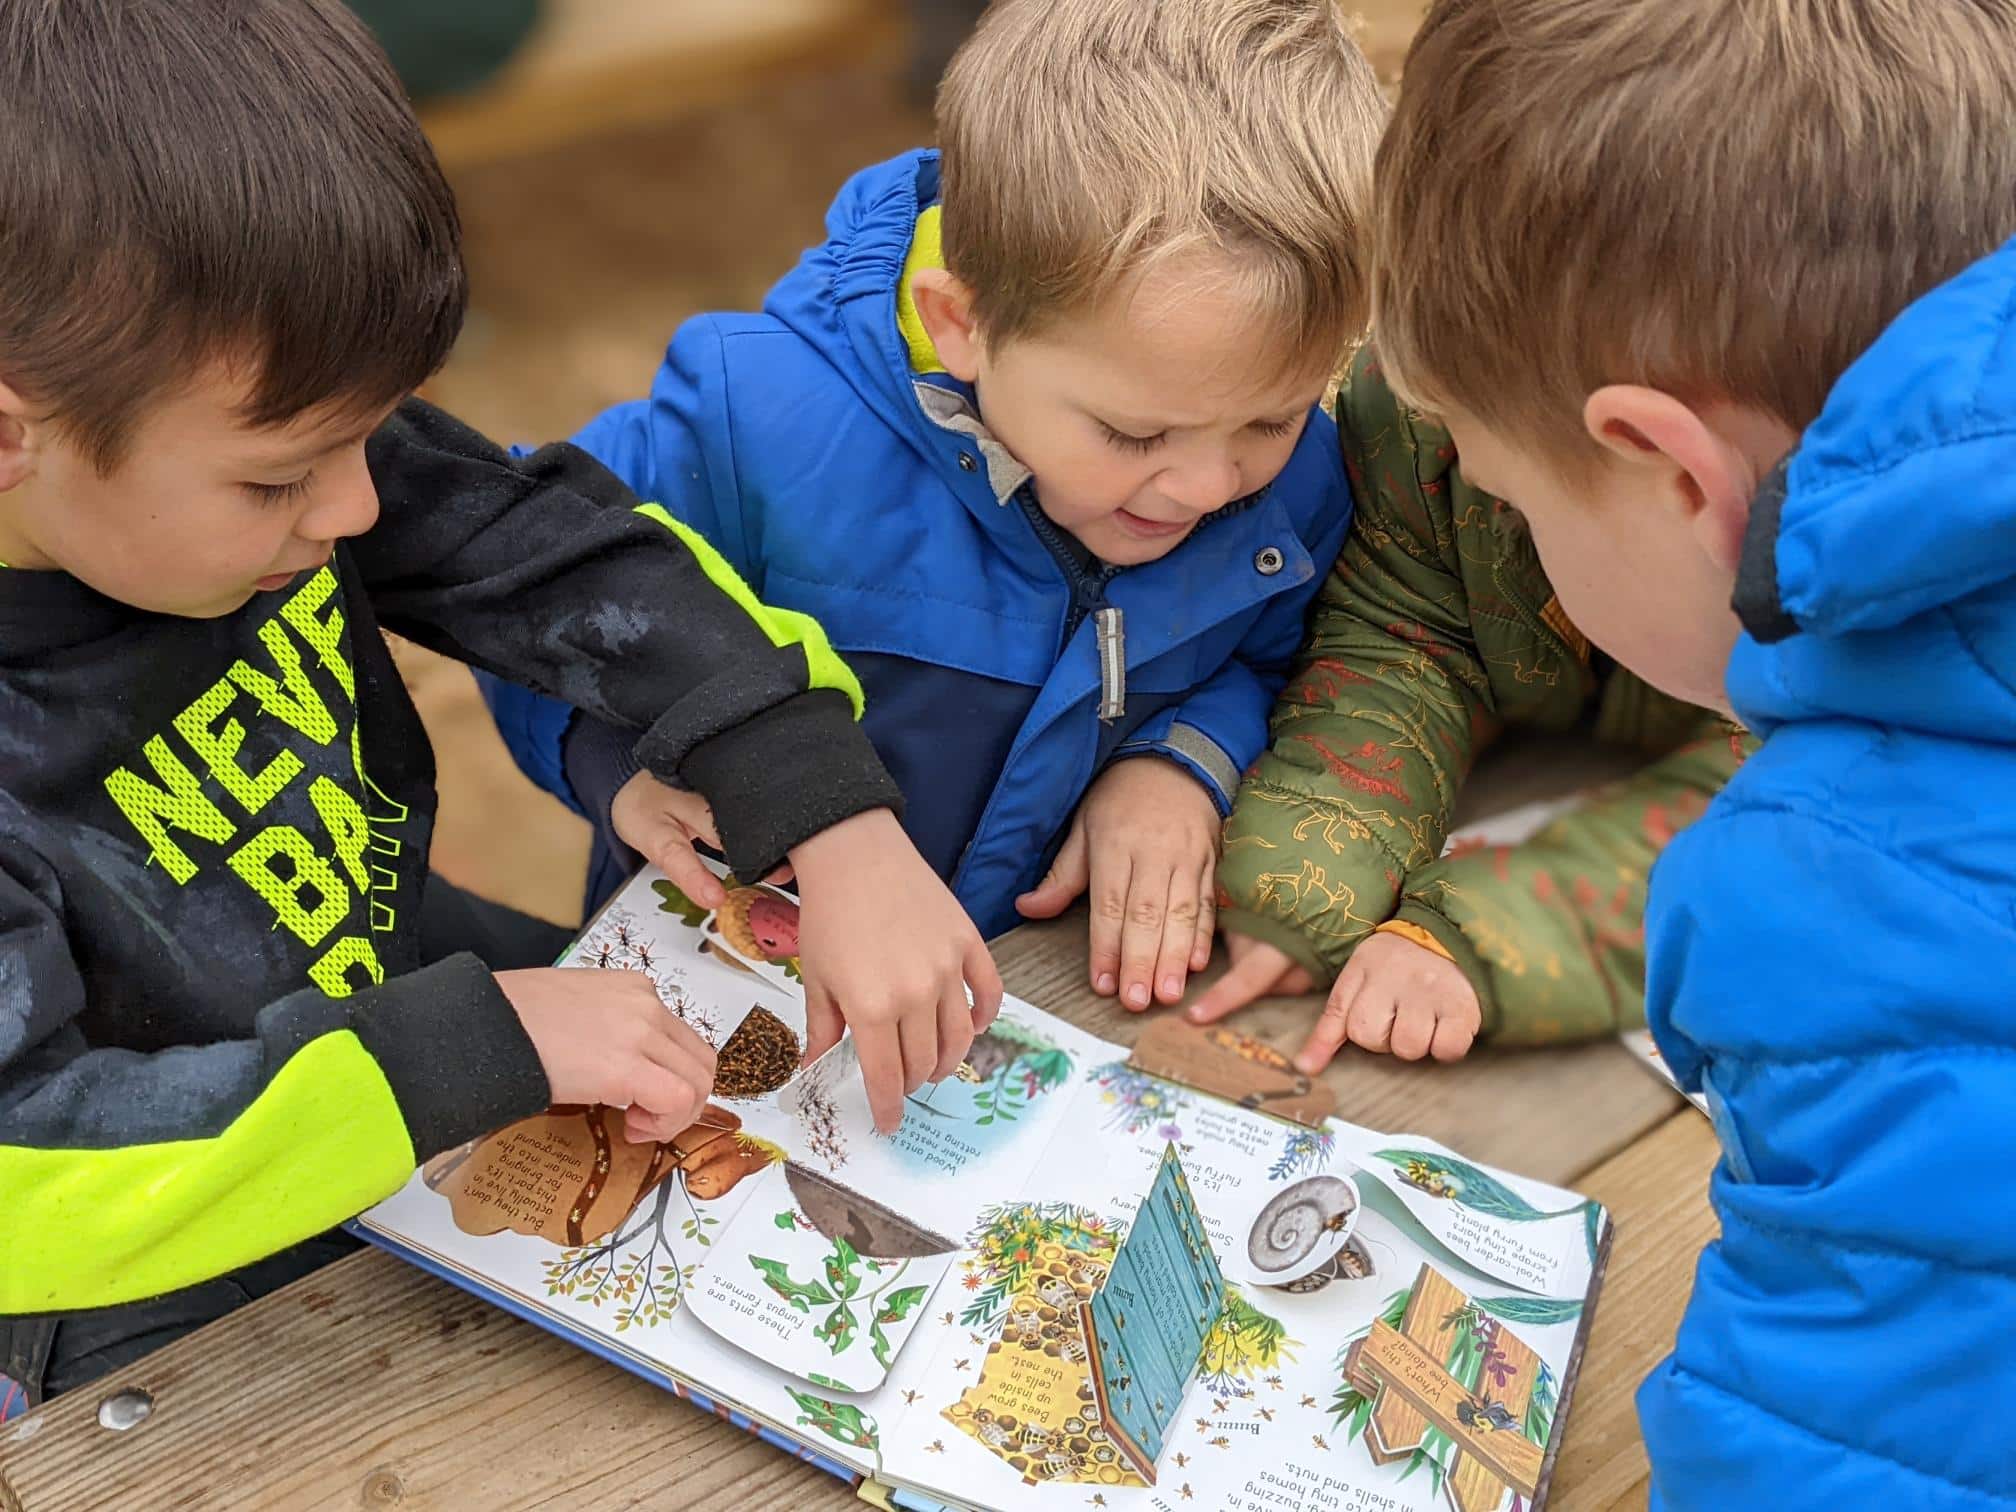 Preschool-age children gather at a picnic table to look at a nature book